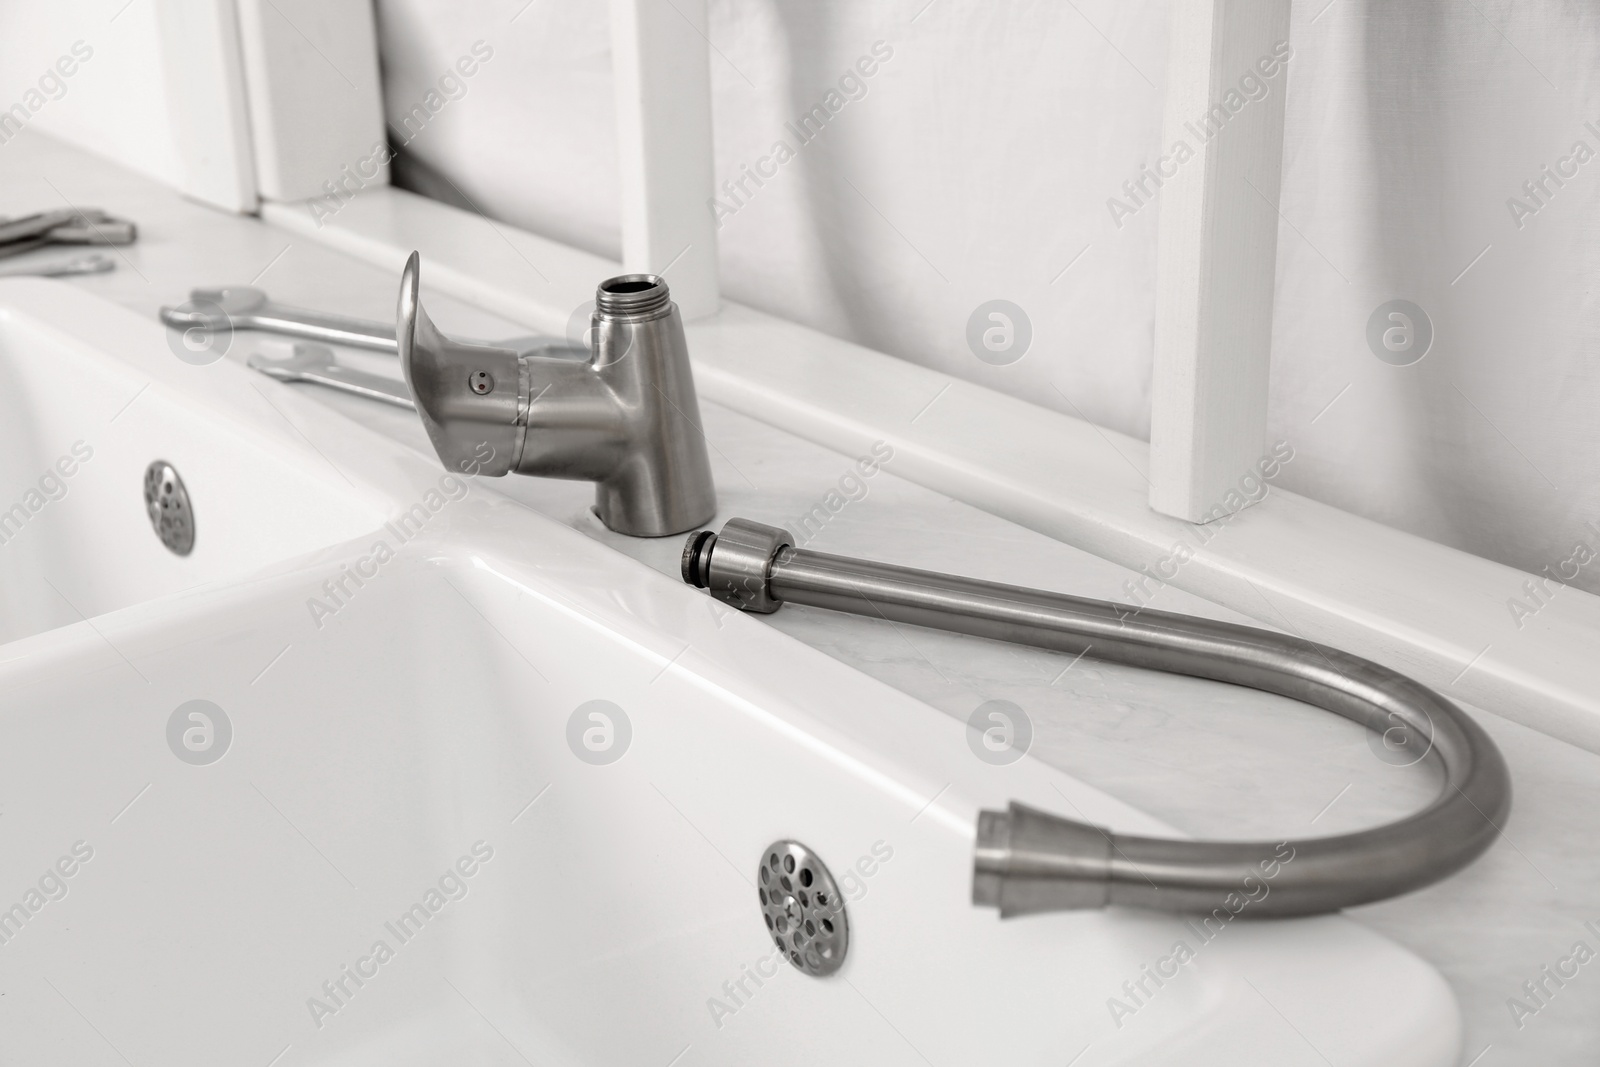 Photo of Plumber's tools and water tap ready for installation near sink on countertop in kitchen